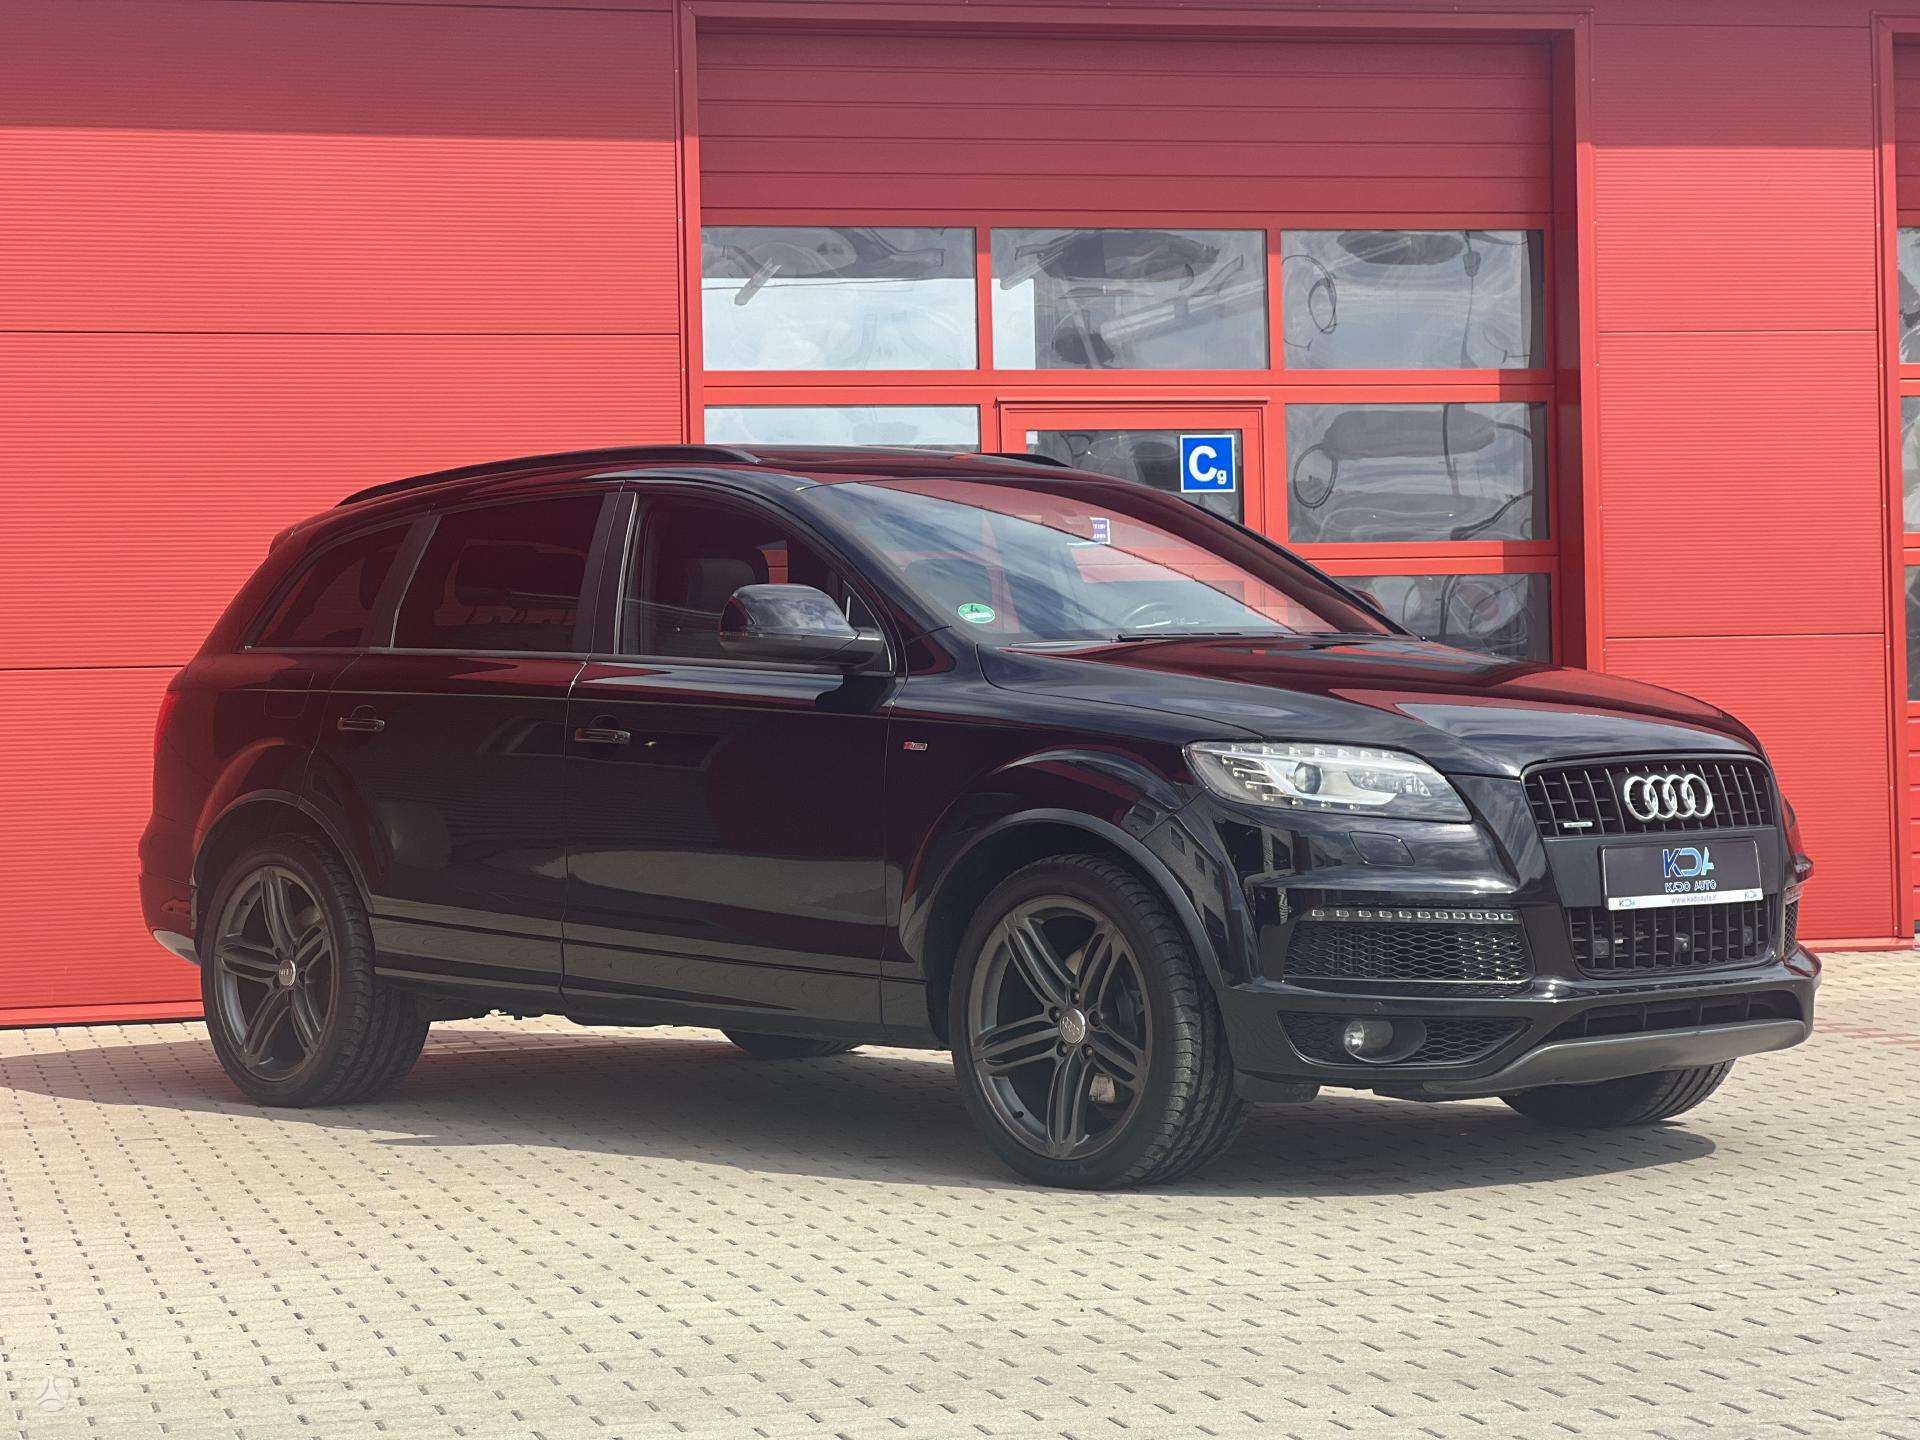 Lithuania - Audi Q7 4L, Location: Berlin - 762km from home.…